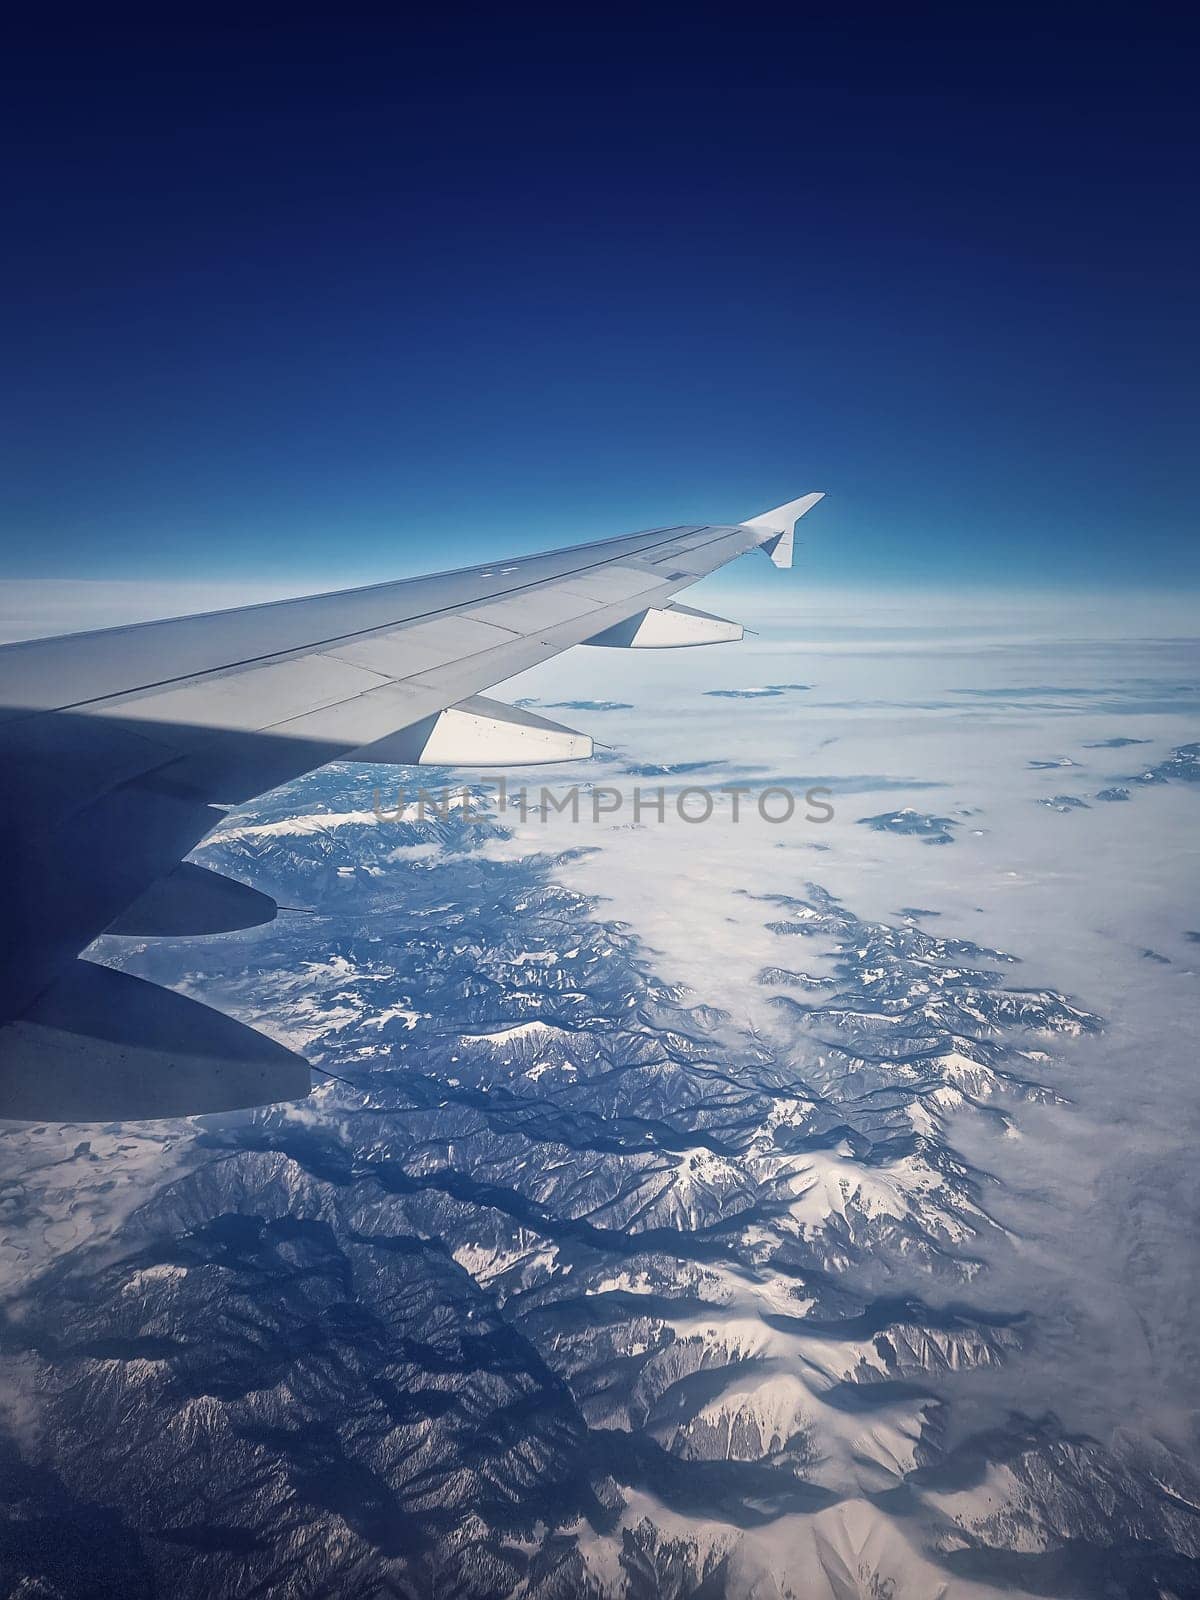 Plane flight above the Carpathian Mountains snowy peaks. Blue skyline and airplane wing seen through the window, vertical background